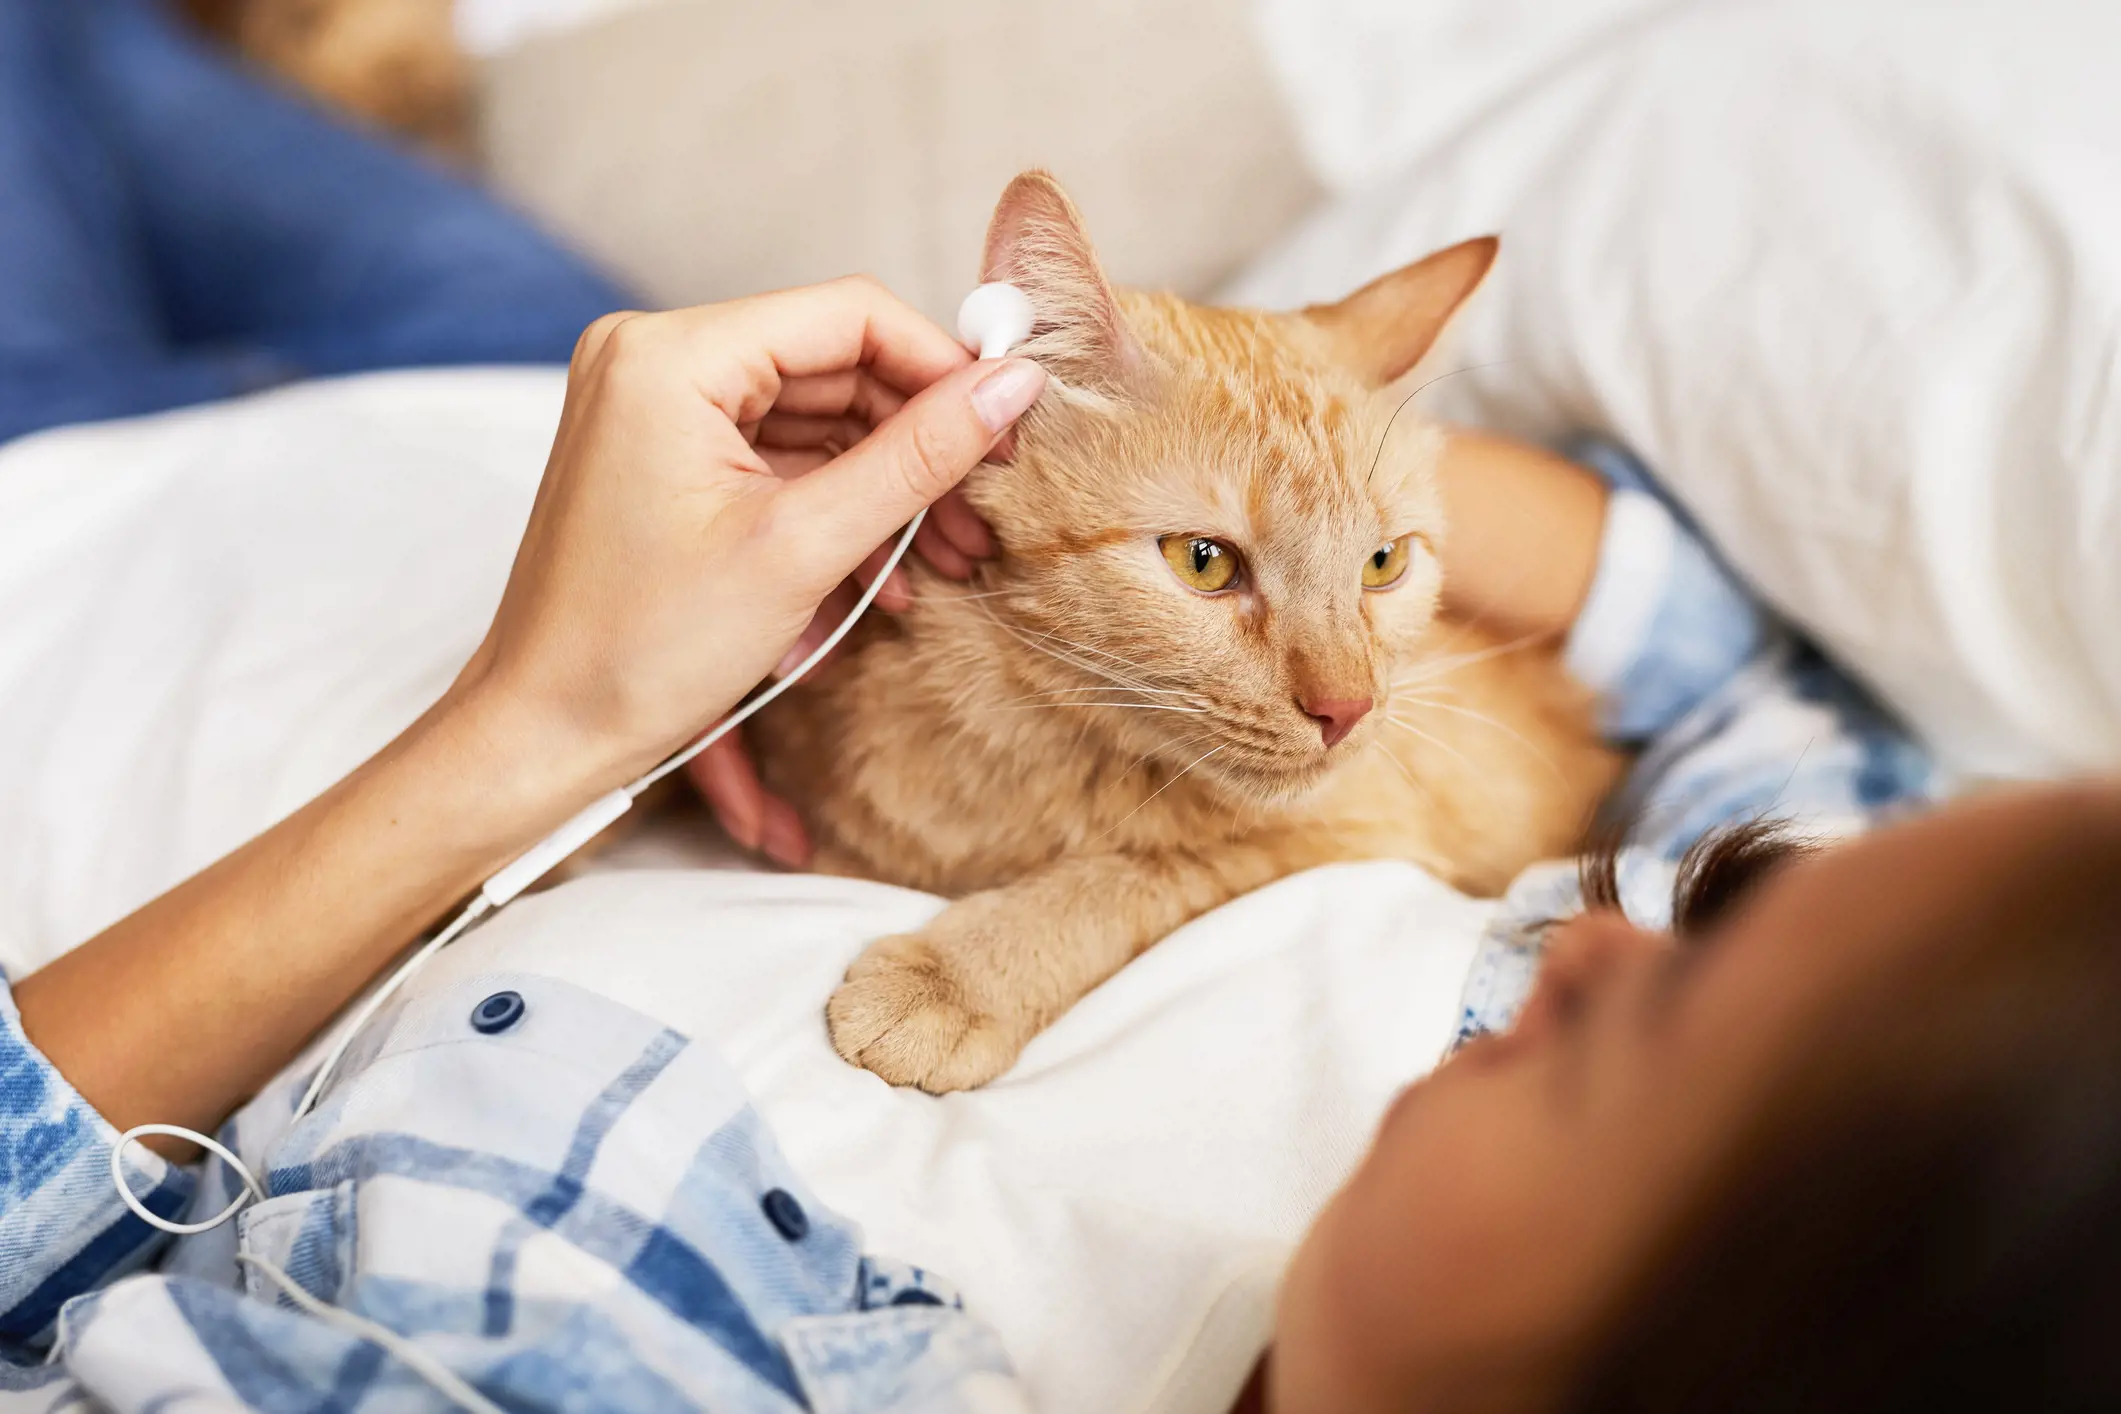 Music can reduce cats' stress levels, study shows